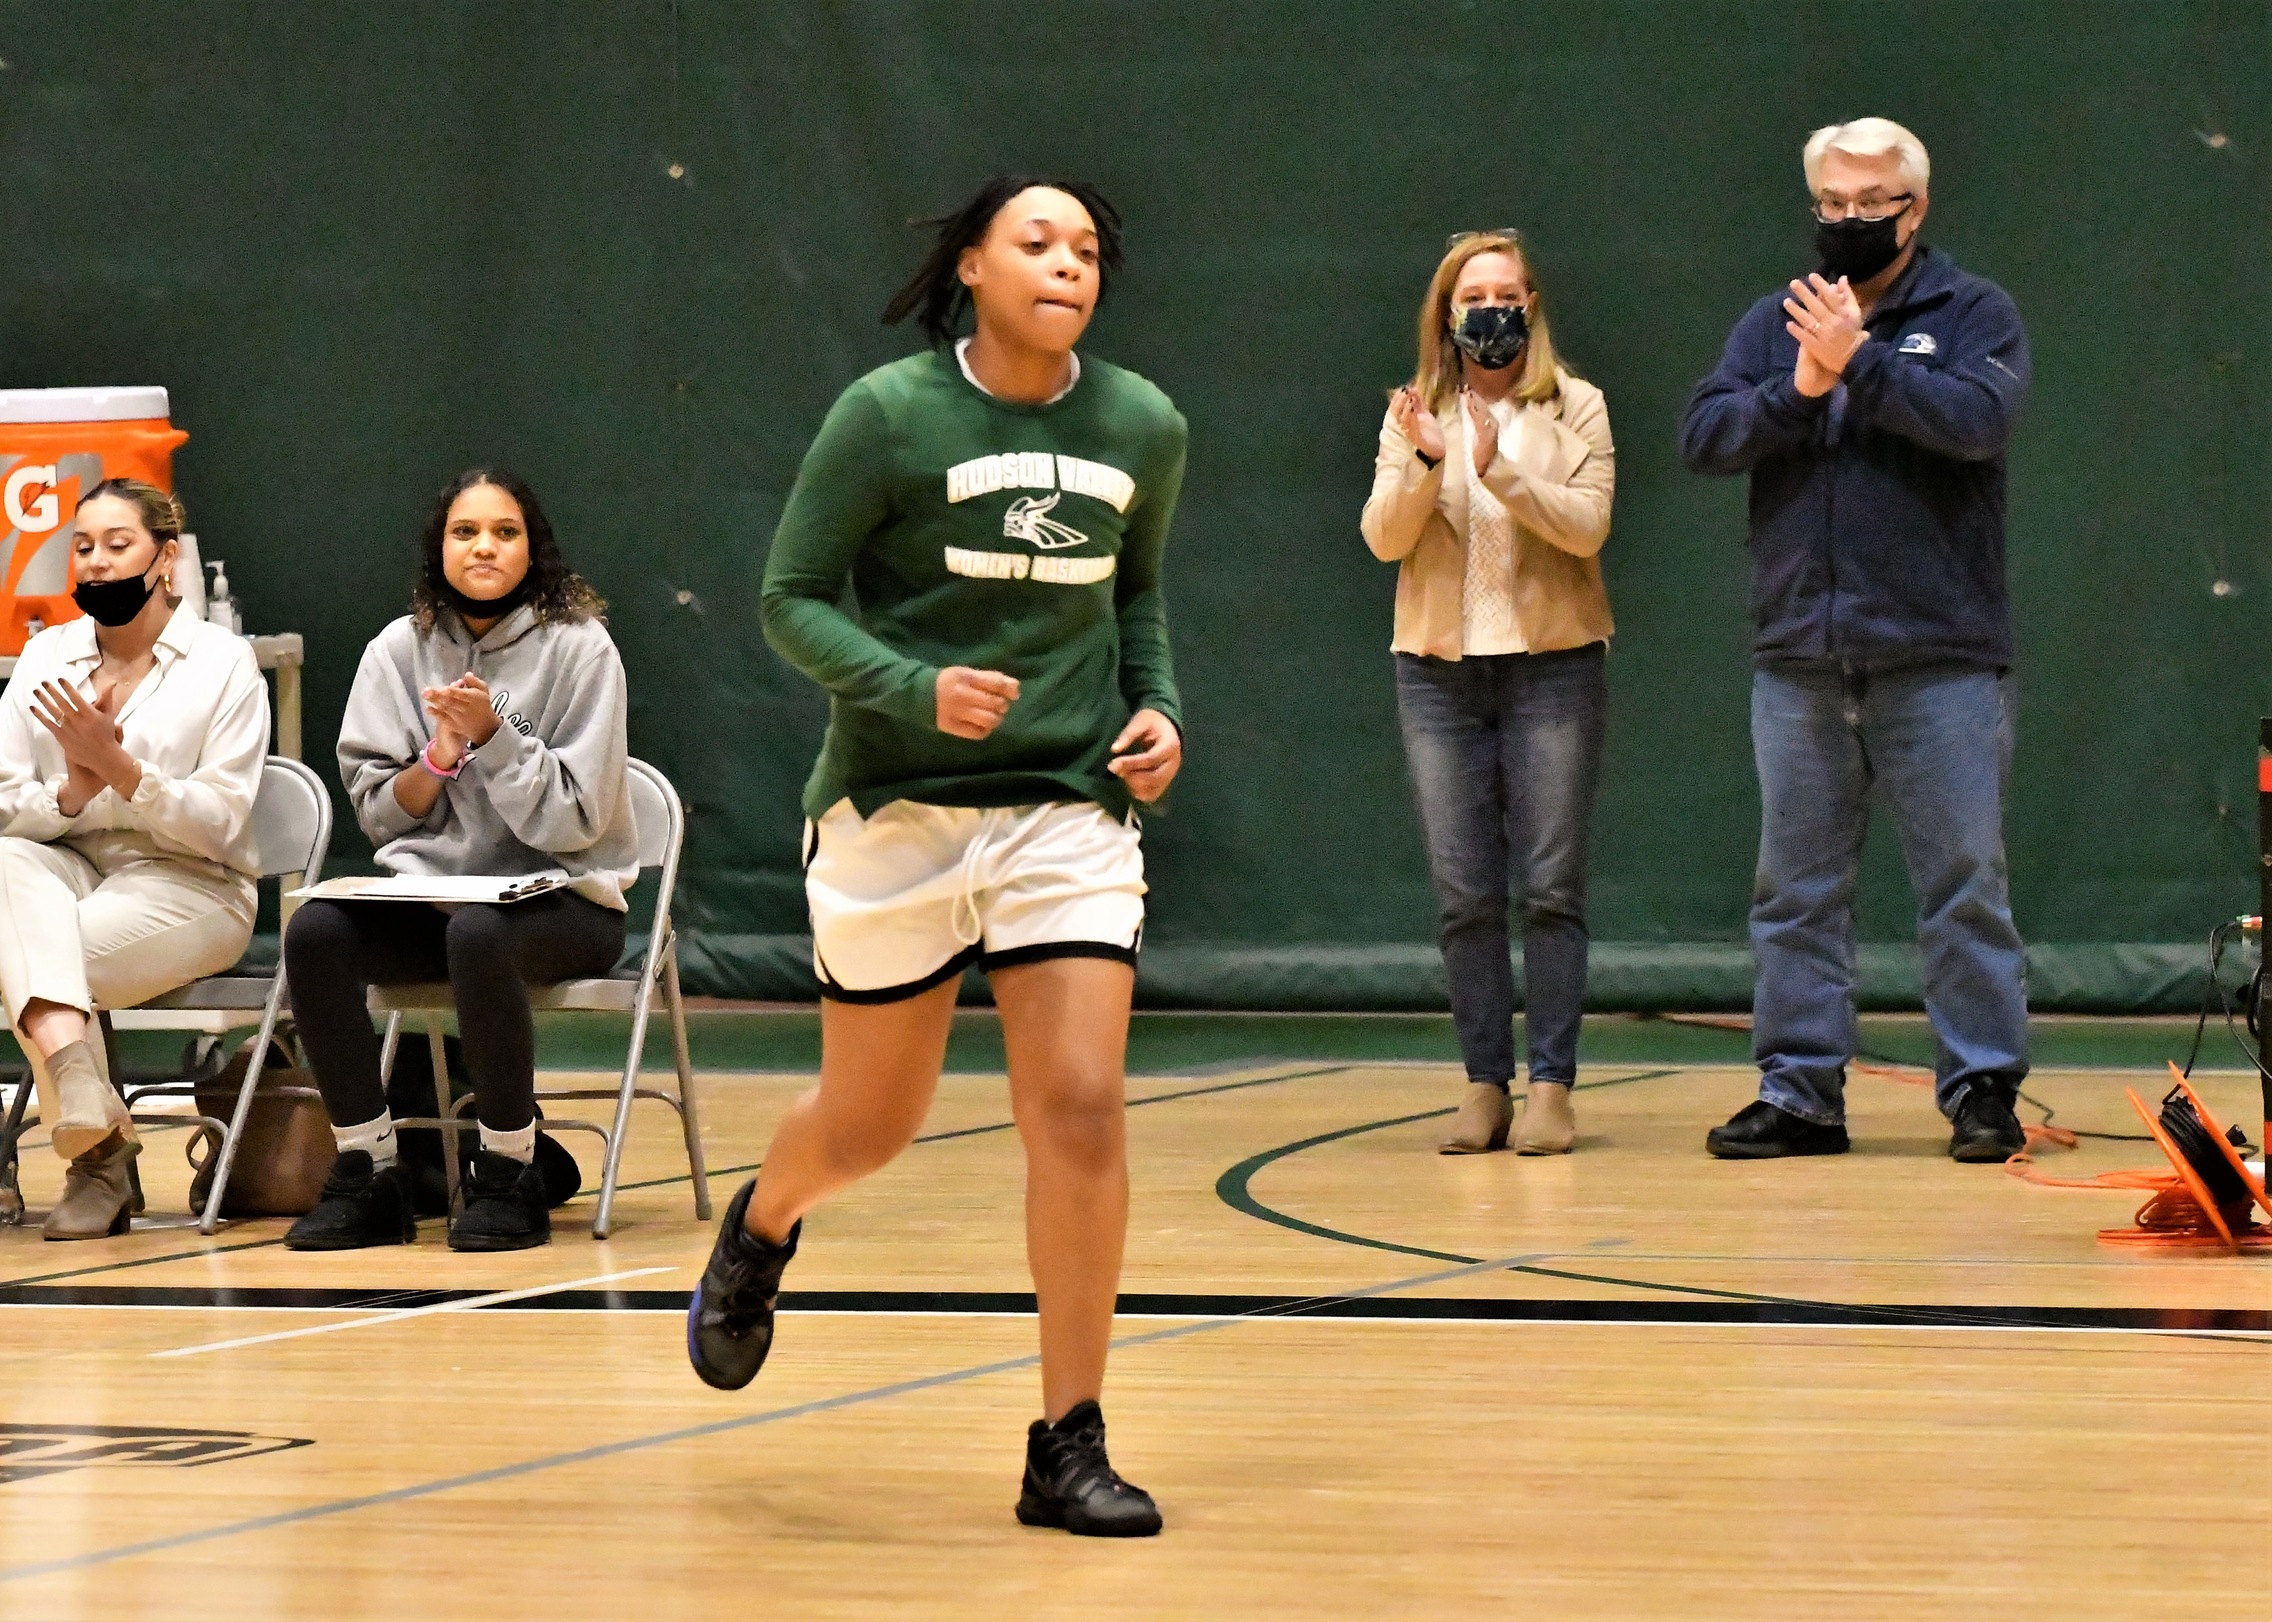 Women's Basketball Season Comes to an End in Quarterfinal Round